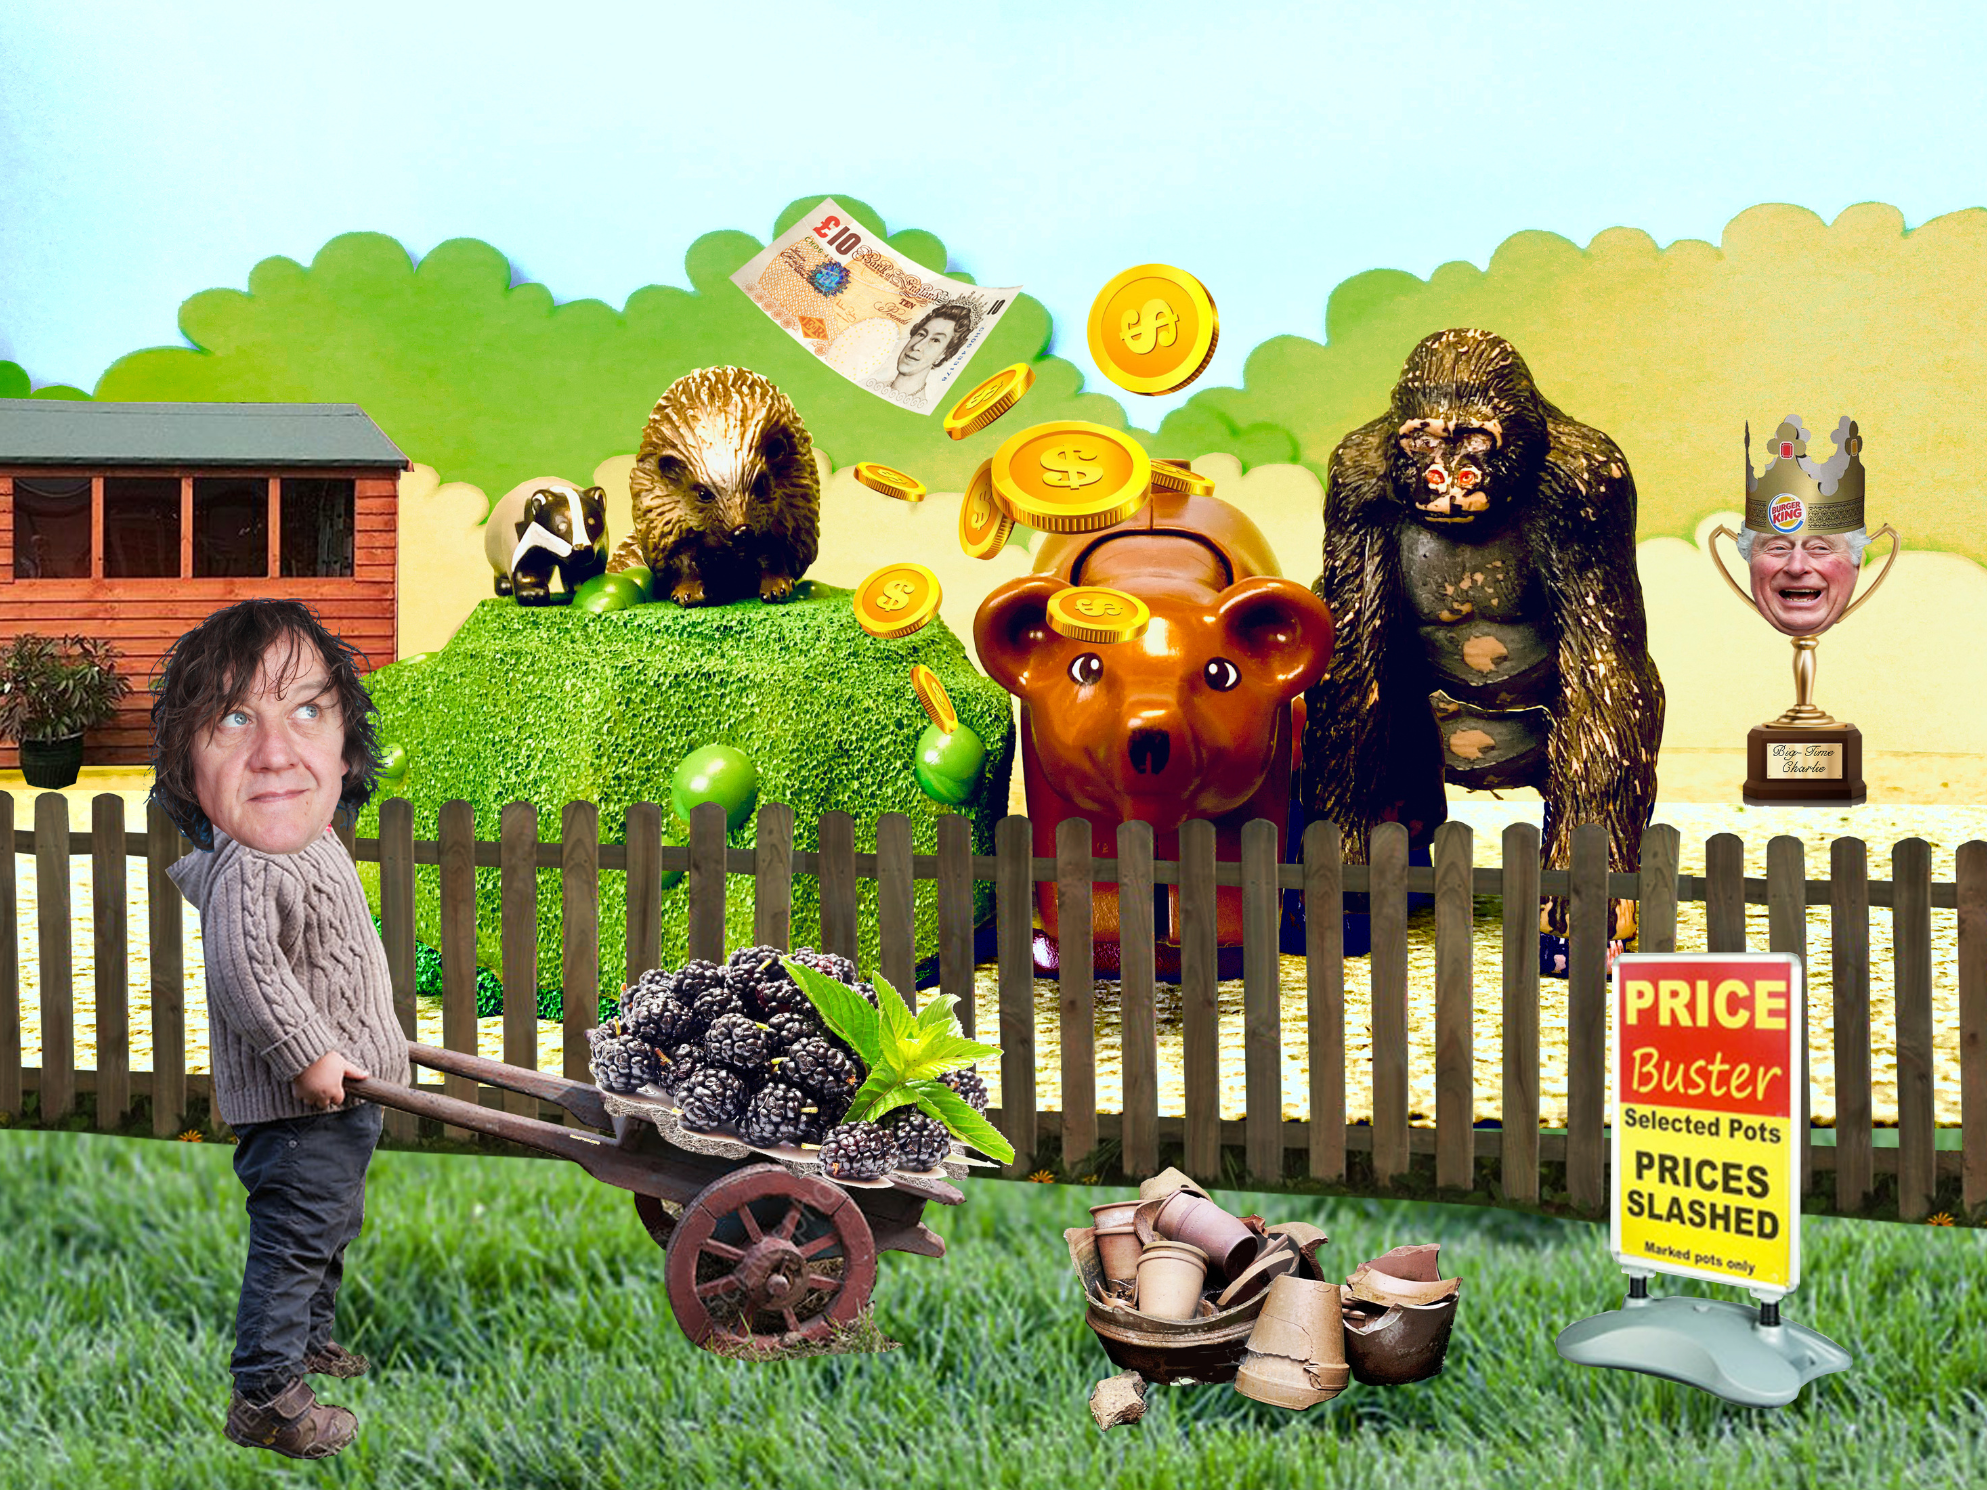 A cartoon image of a man with a wheelbarrow filled with raspberries. Behind a wooden fence is a shed, badger, hedgehog, piggy bank with money flying out of it, a gorilla and a trophy that's made out of a face wearing a Burger King hat.